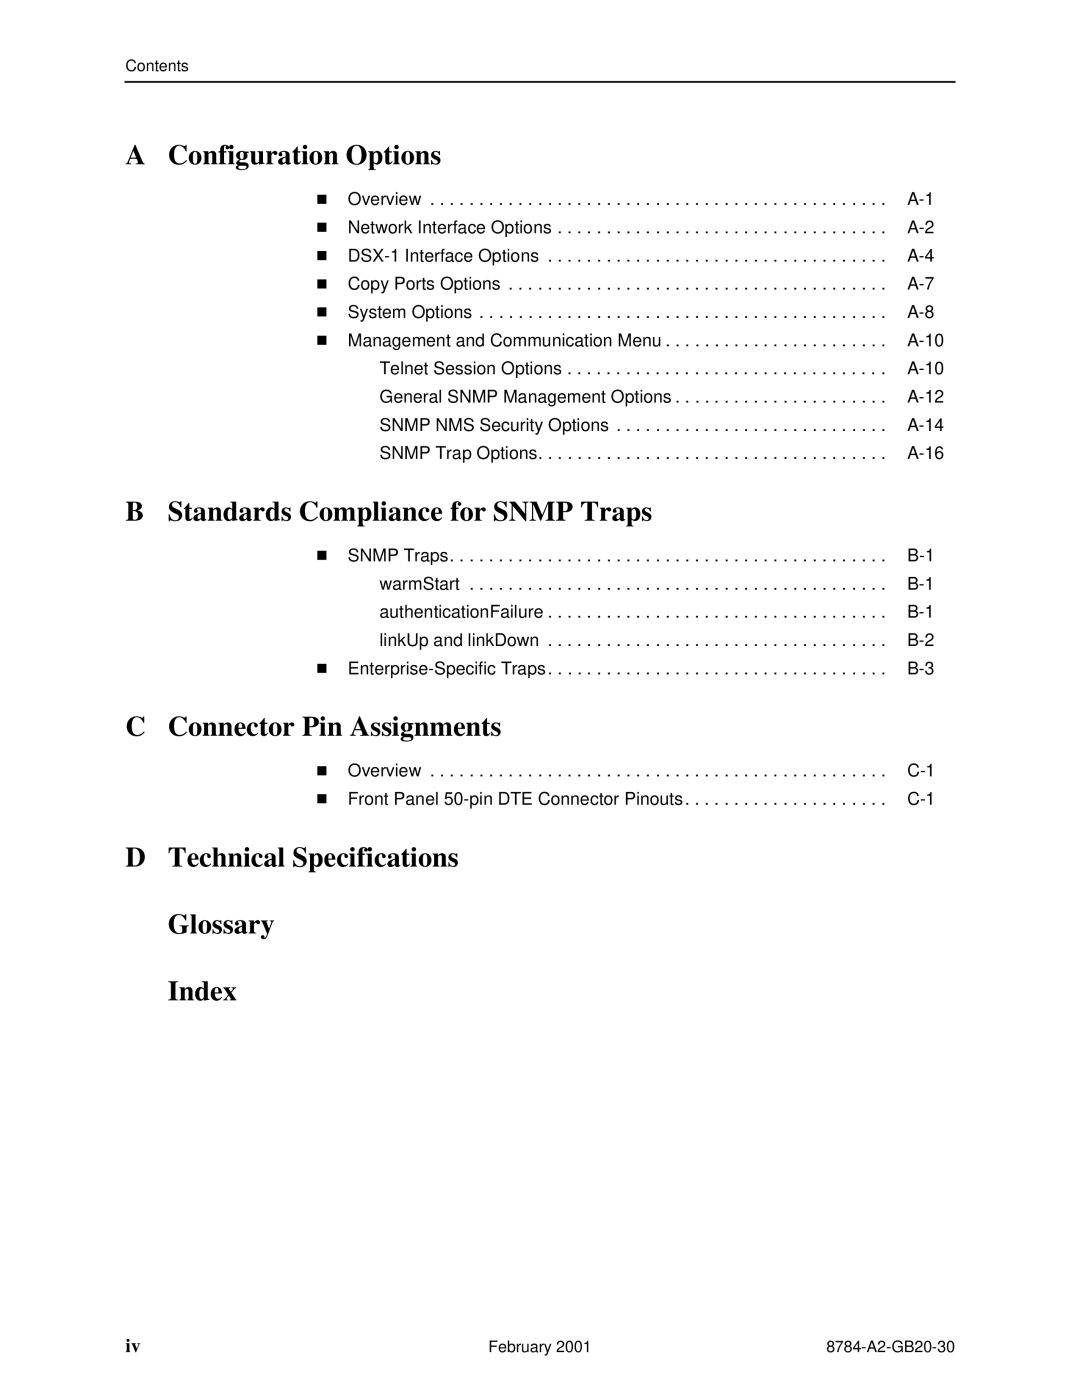 Paradyne 8784 manual A Configuration Options, B Standards ComplianceT for SNMP Traps, C Connector Pin Assignments 